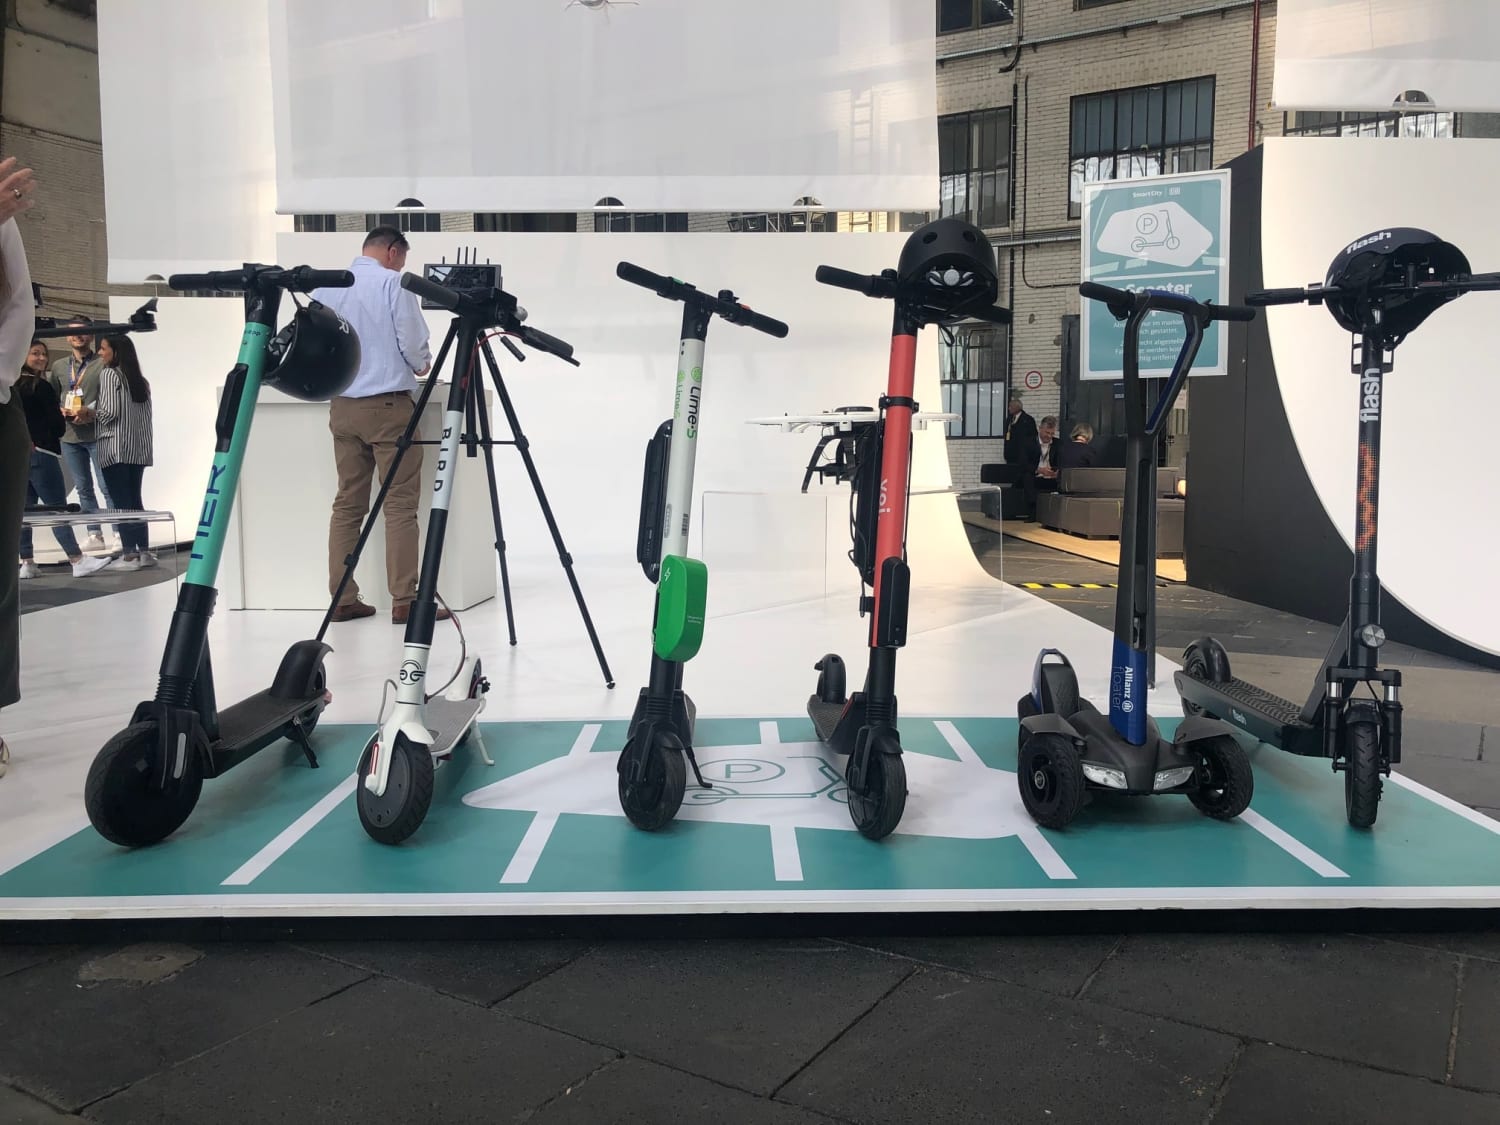 Bird is scrapping thousands of electric scooters in the Middle East